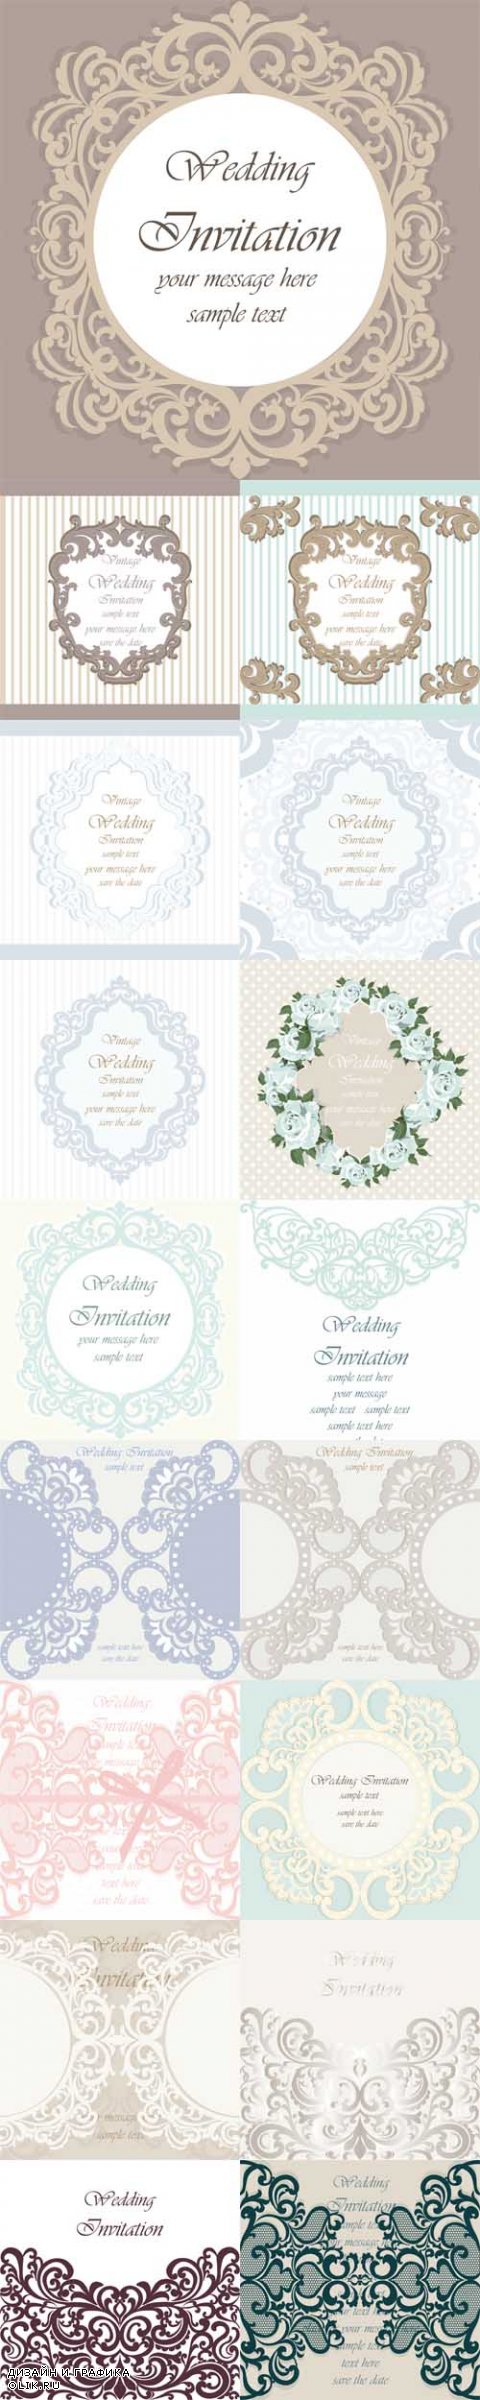 Vector Wedding Invitation Card with Lace Ornament